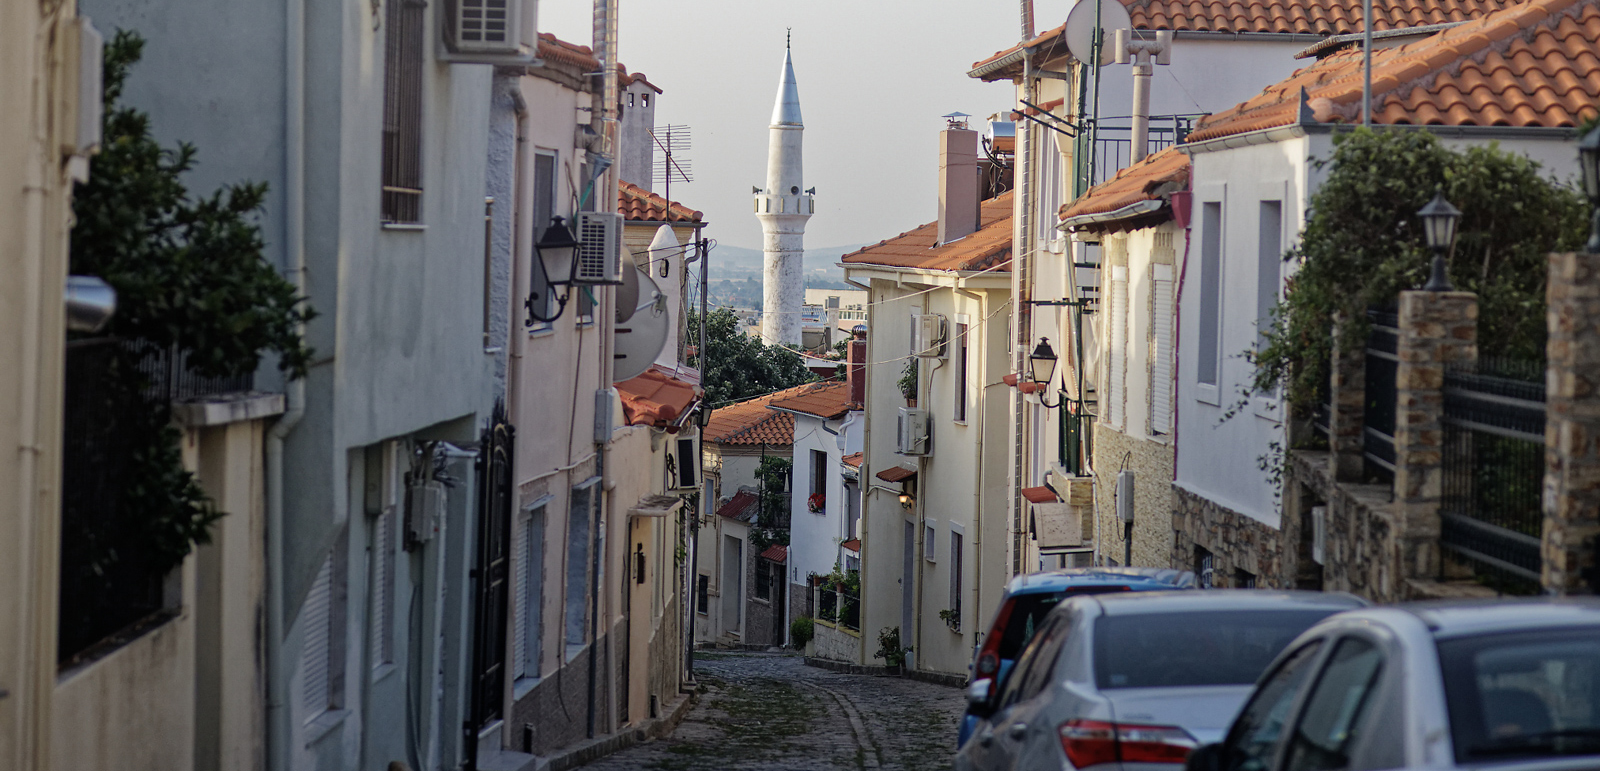 Street scene in a Muslim district of Xanthi, Greek Thrace's second-largest city and formerly a wealthy tobacco-farming center. Photography for Hyphen by Iason Athanasiadis